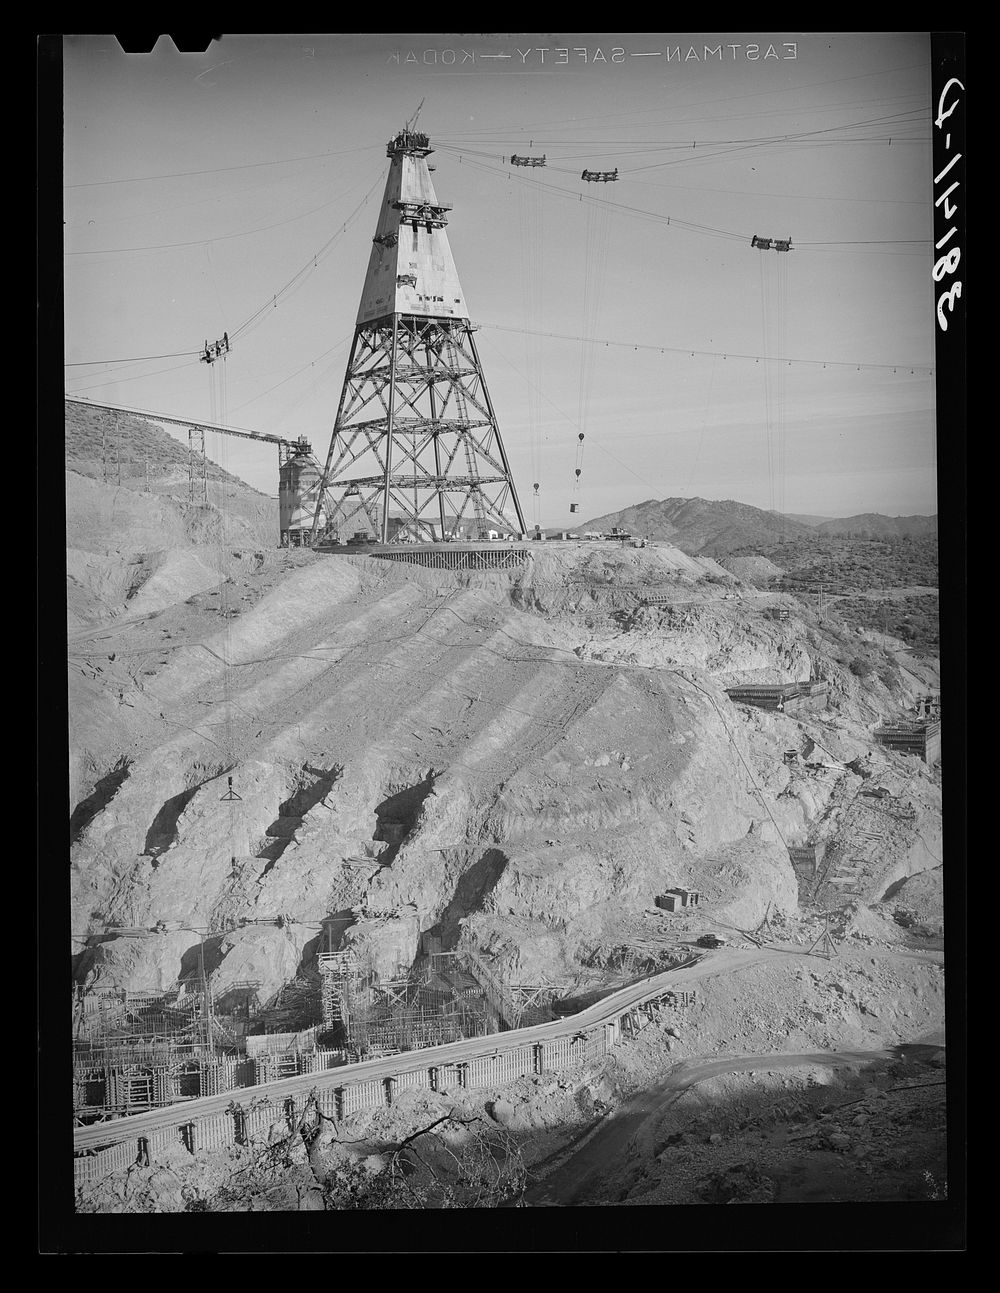 Central tower from which materials used in construction of Shasta Dam are distributed. Shasta County, California by Russell…